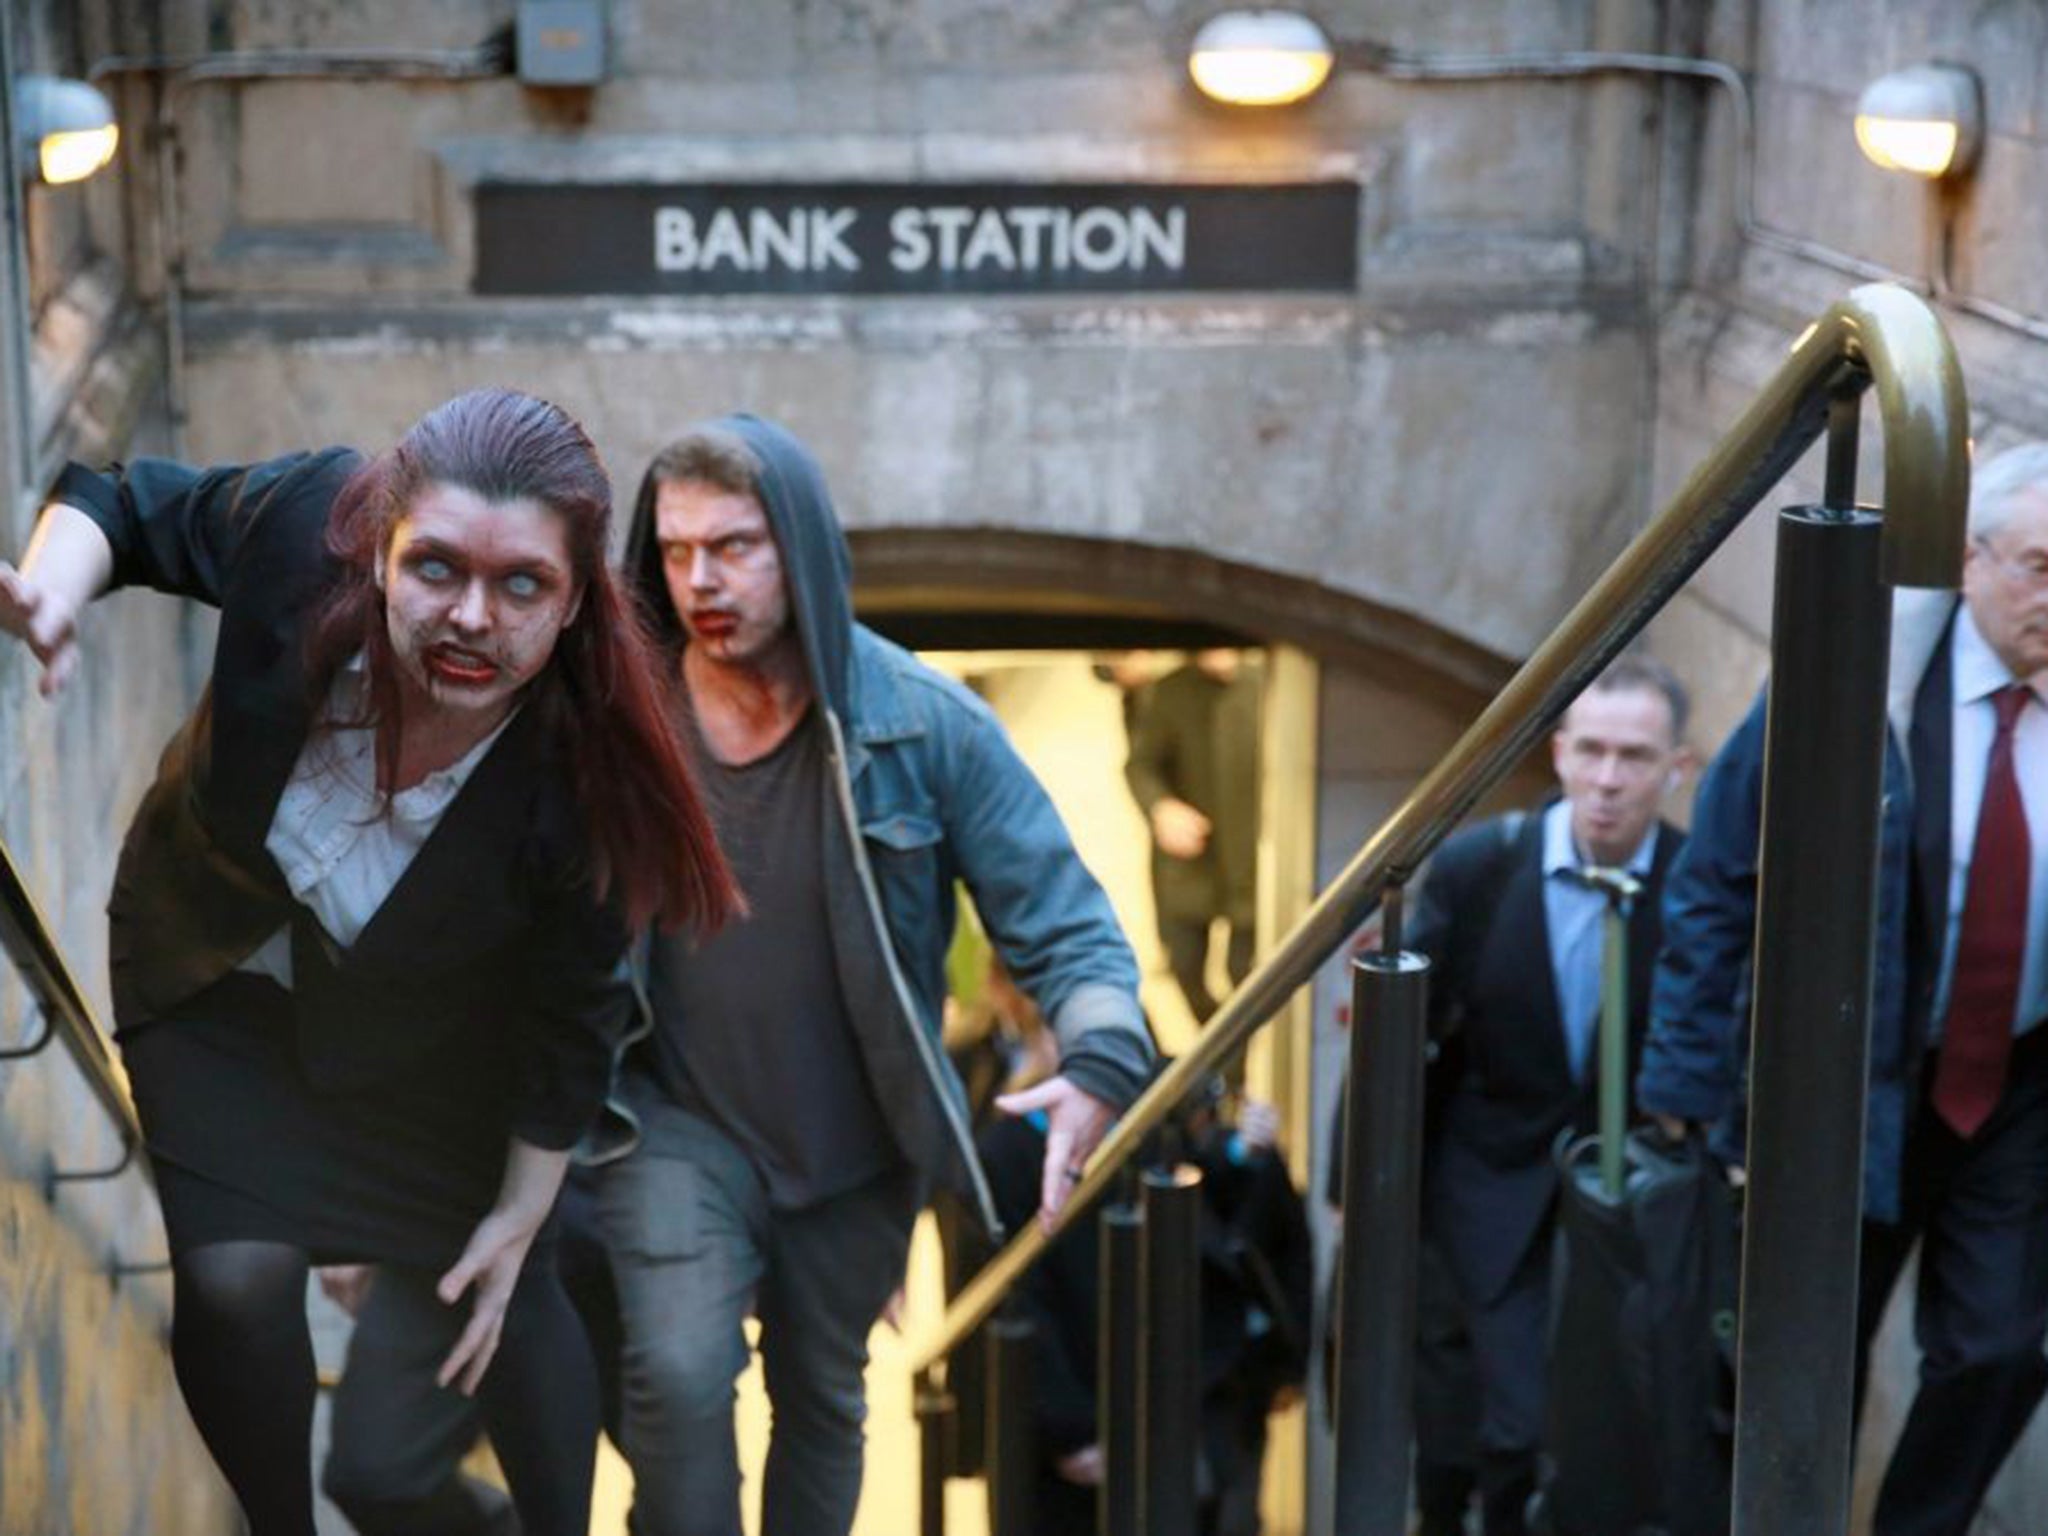 Meet the new breed: a stunt from RateSetter to highlight what it sees as 'zombie' savings rates on the high street